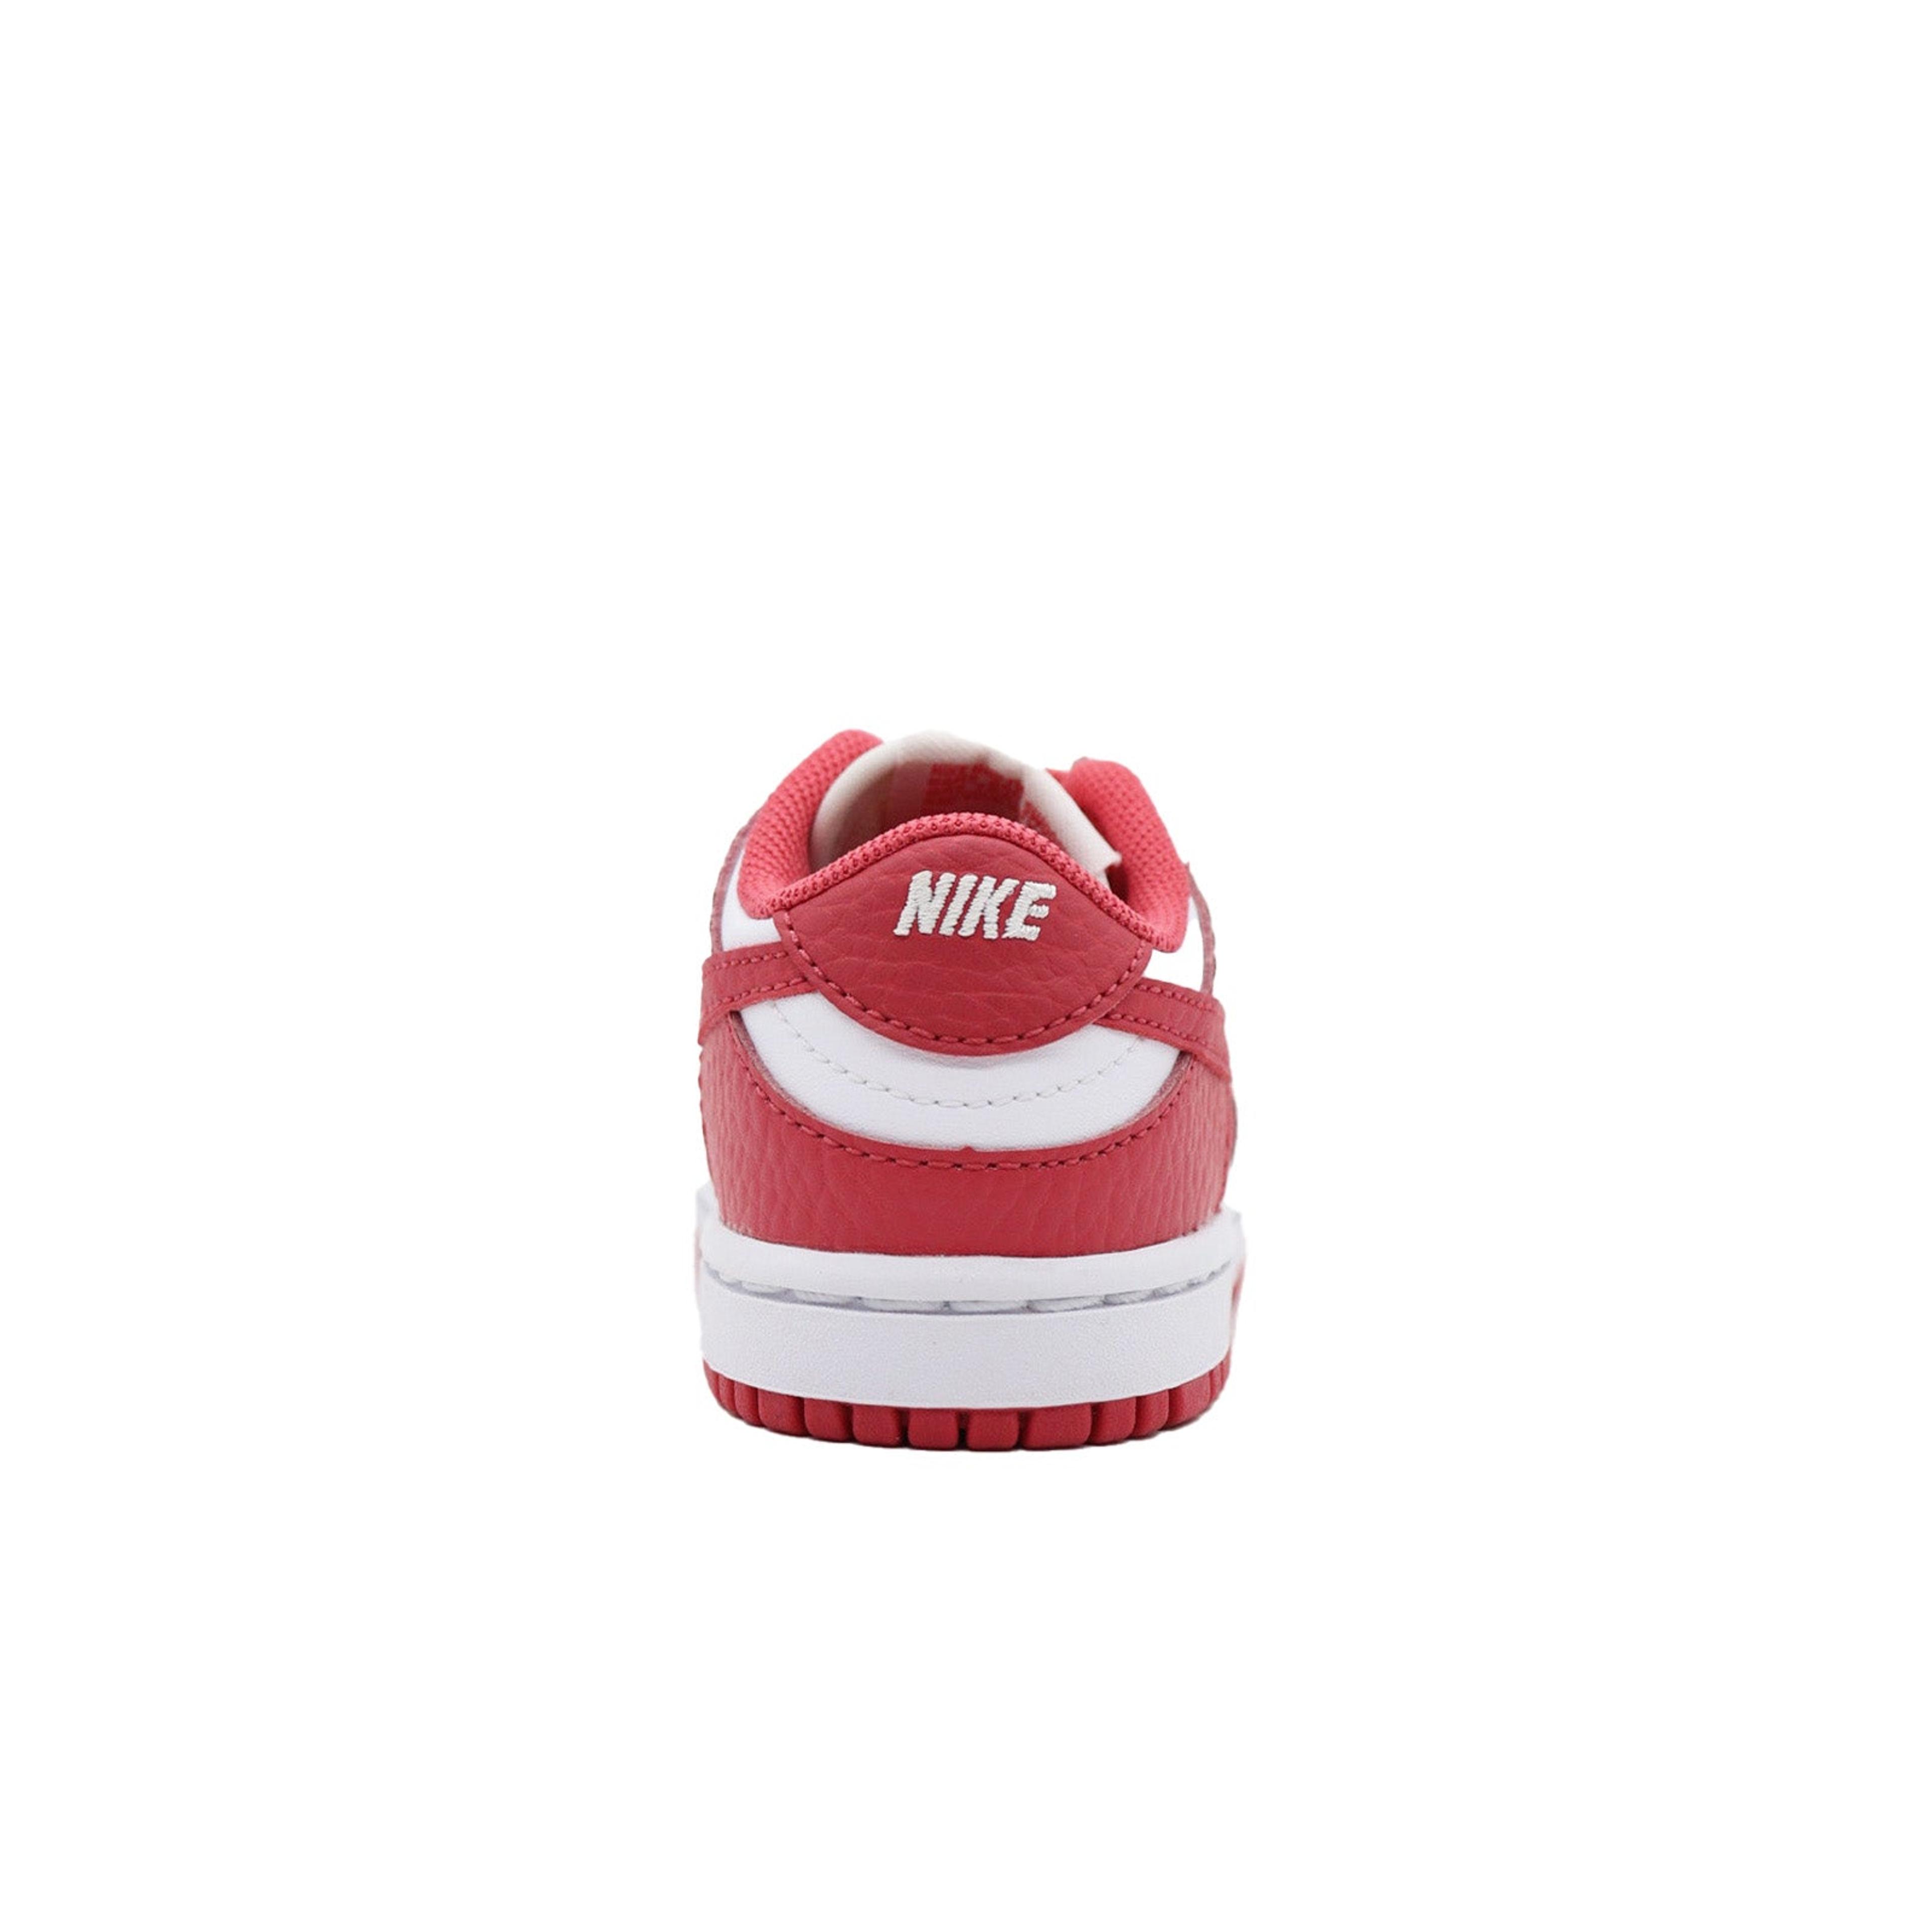 Alternate View 2 of Nike Dunk Low (TD), Gypsy Rose